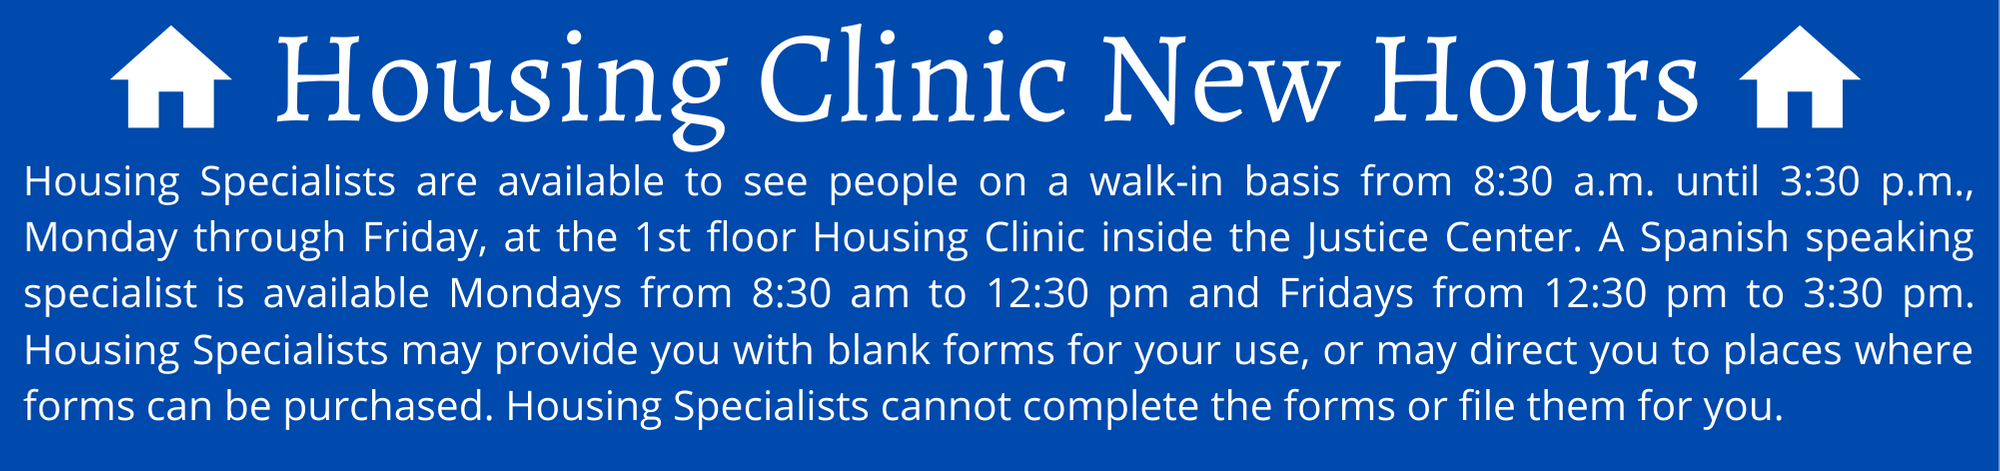 housing clinic hours 